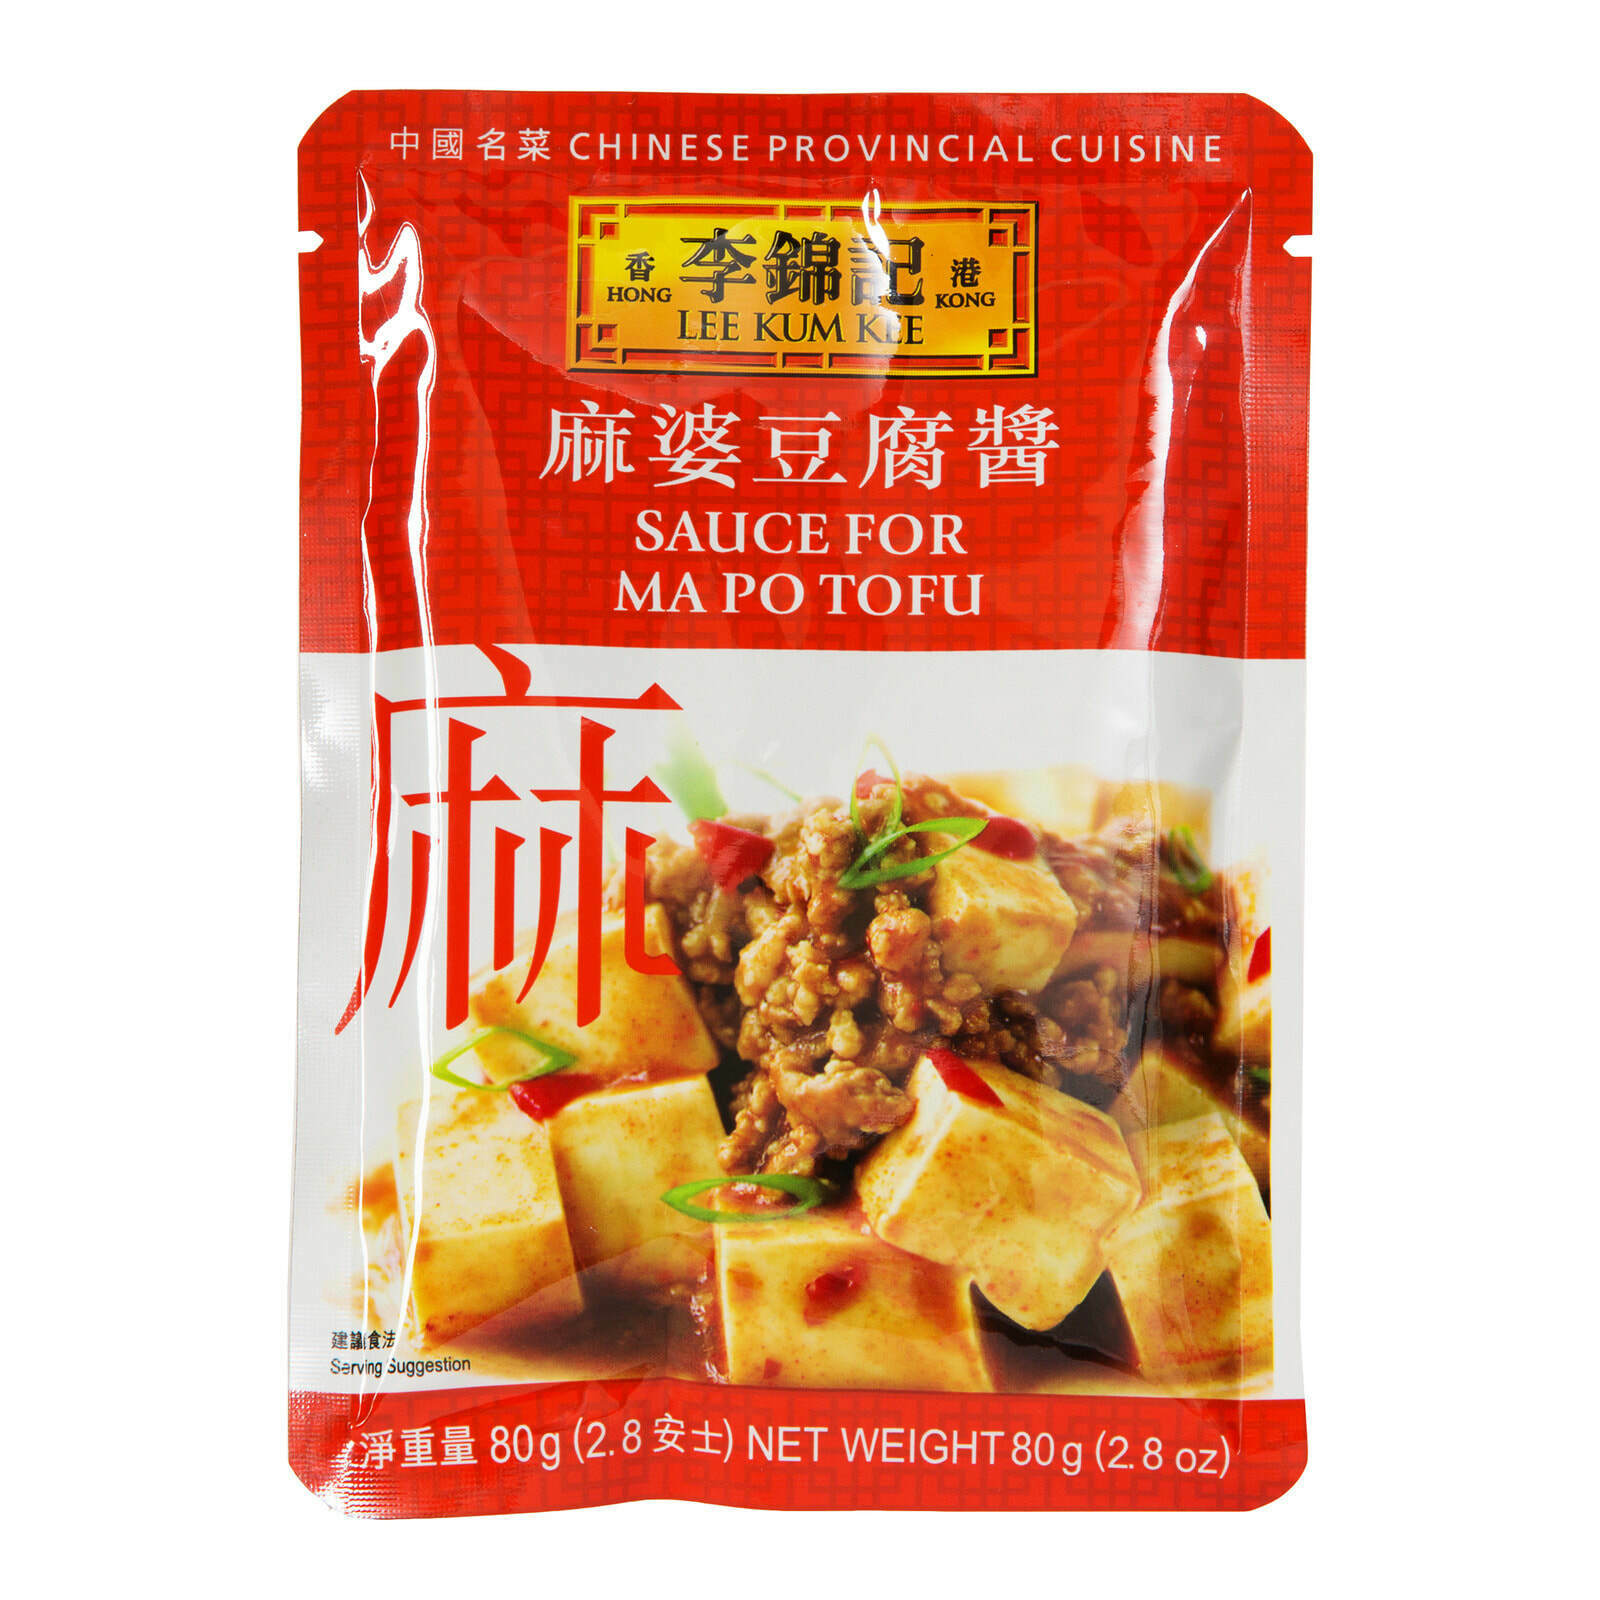 Lee Kum Kee Sauce For Ma Po Tofu, 2.8-Ounce Pouches (Pack of 12)